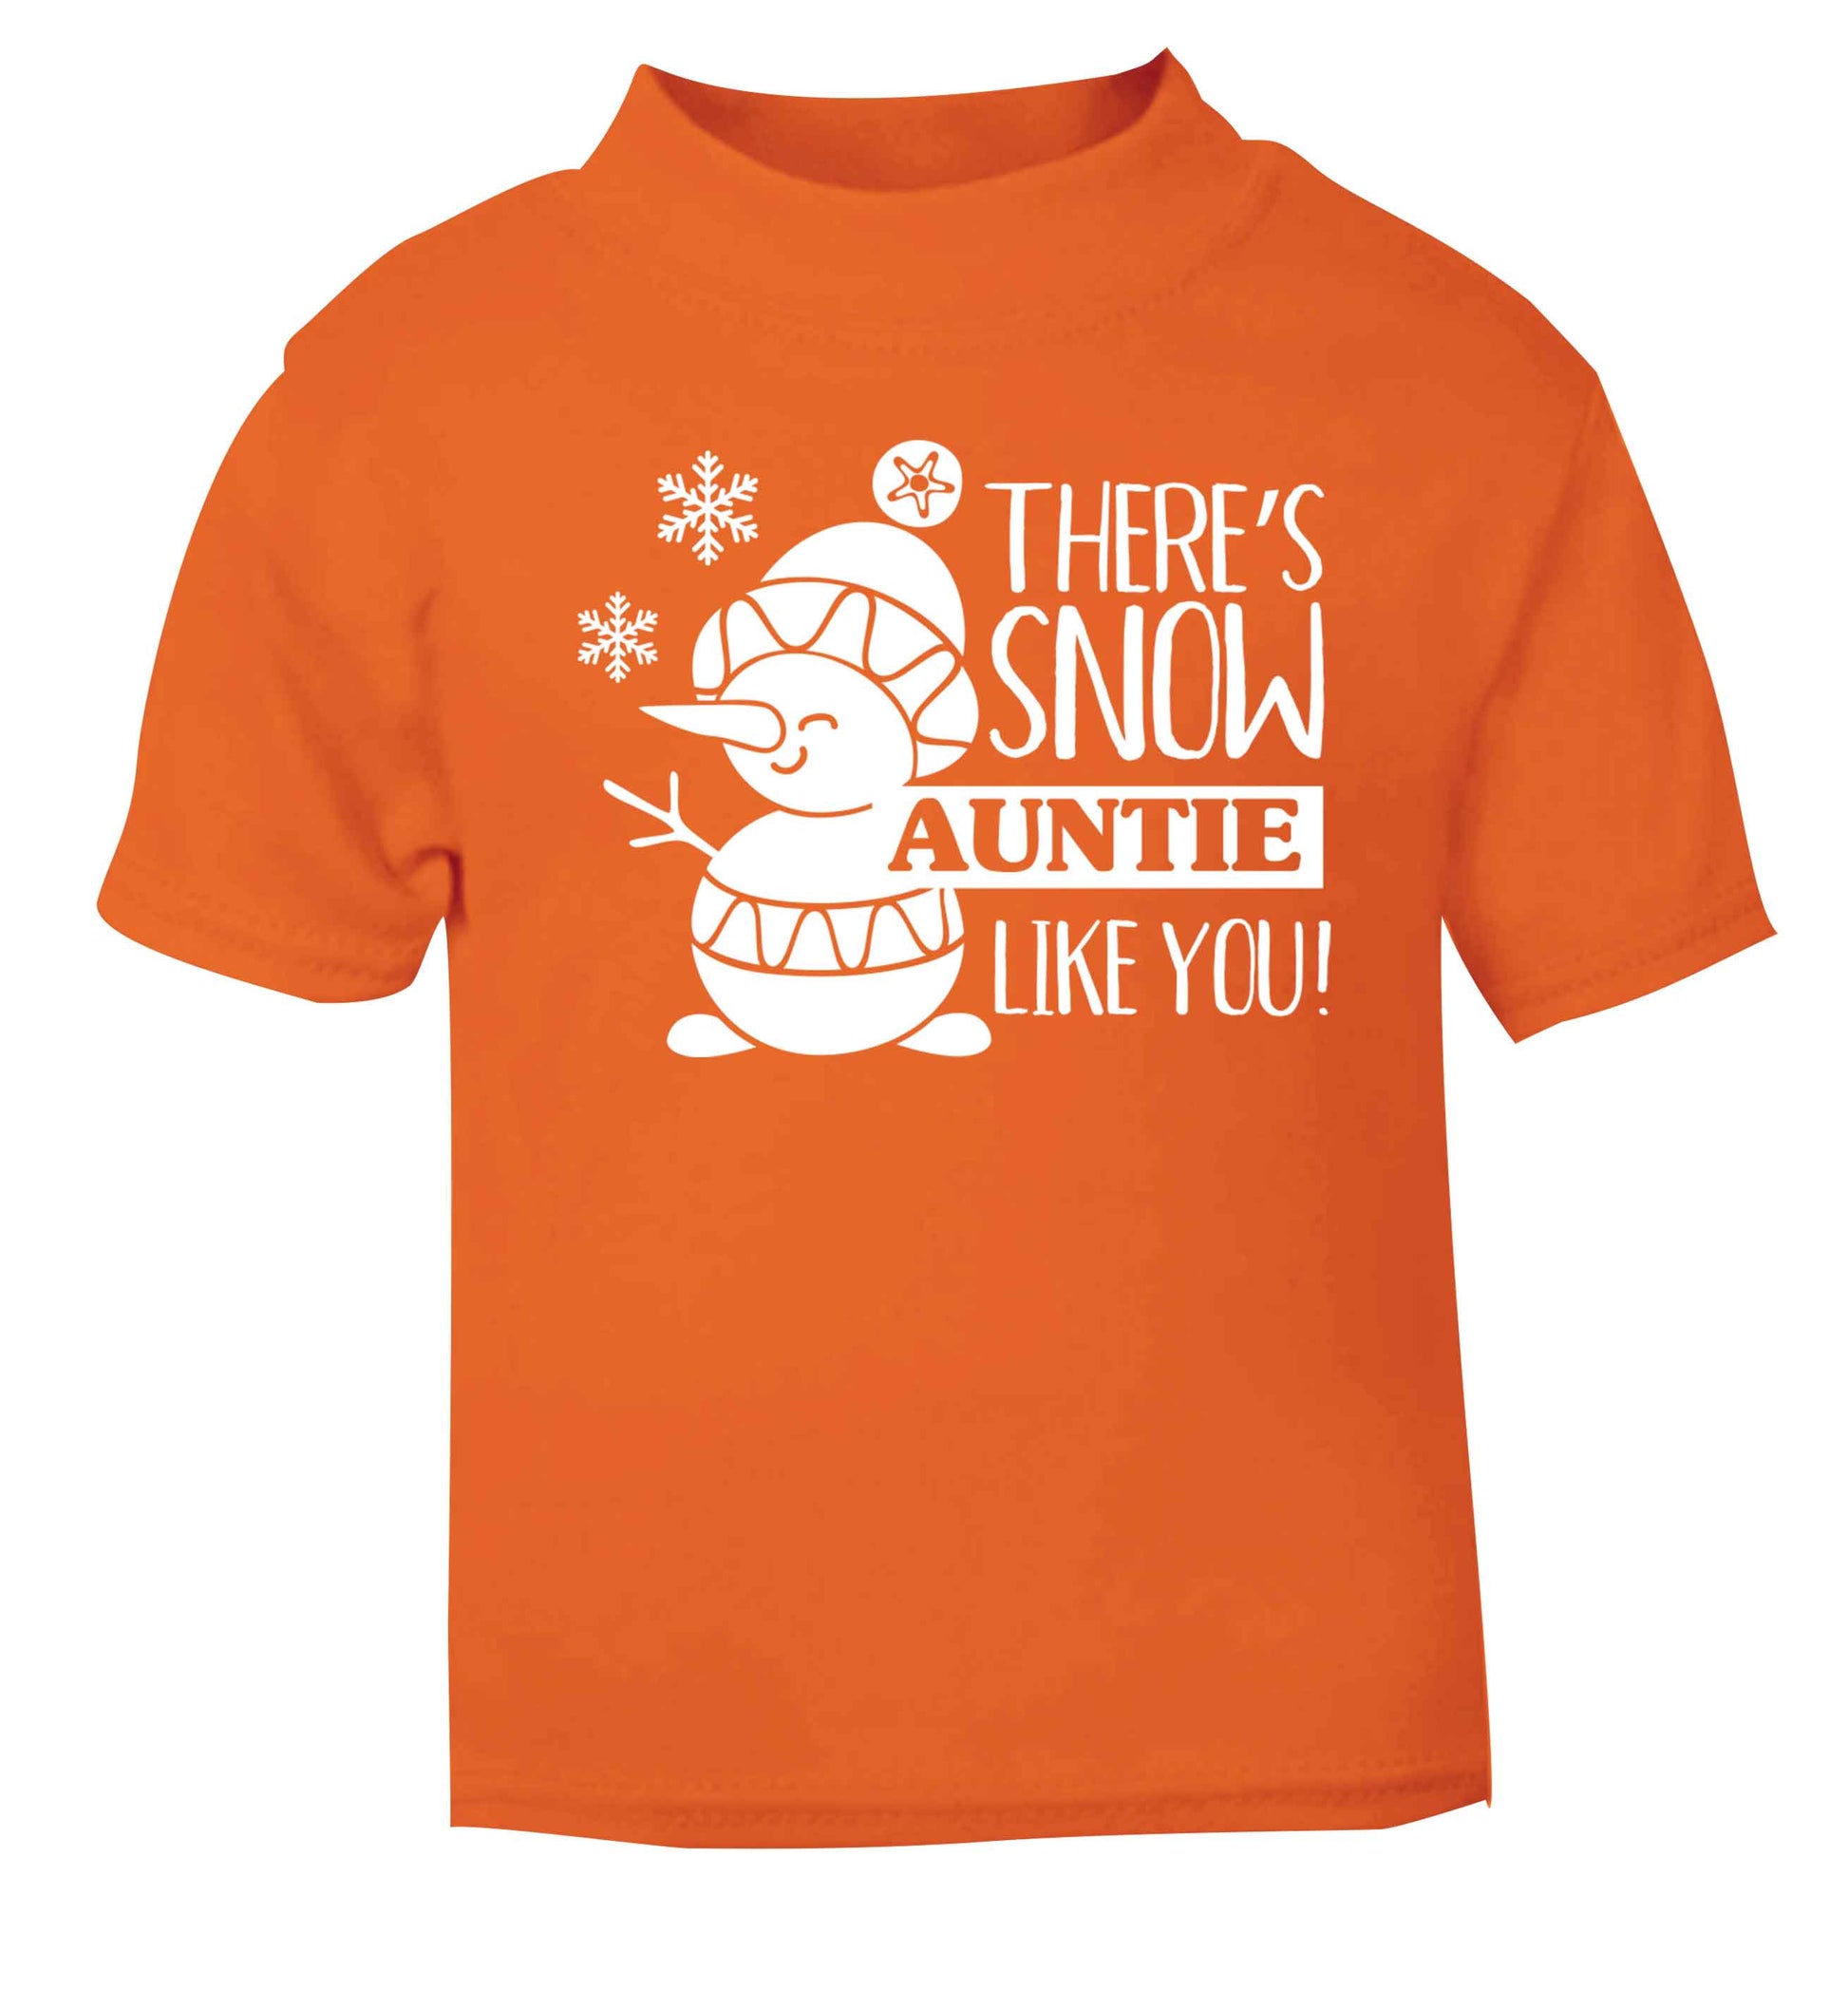 There's snow auntie like you orange baby toddler Tshirt 2 Years